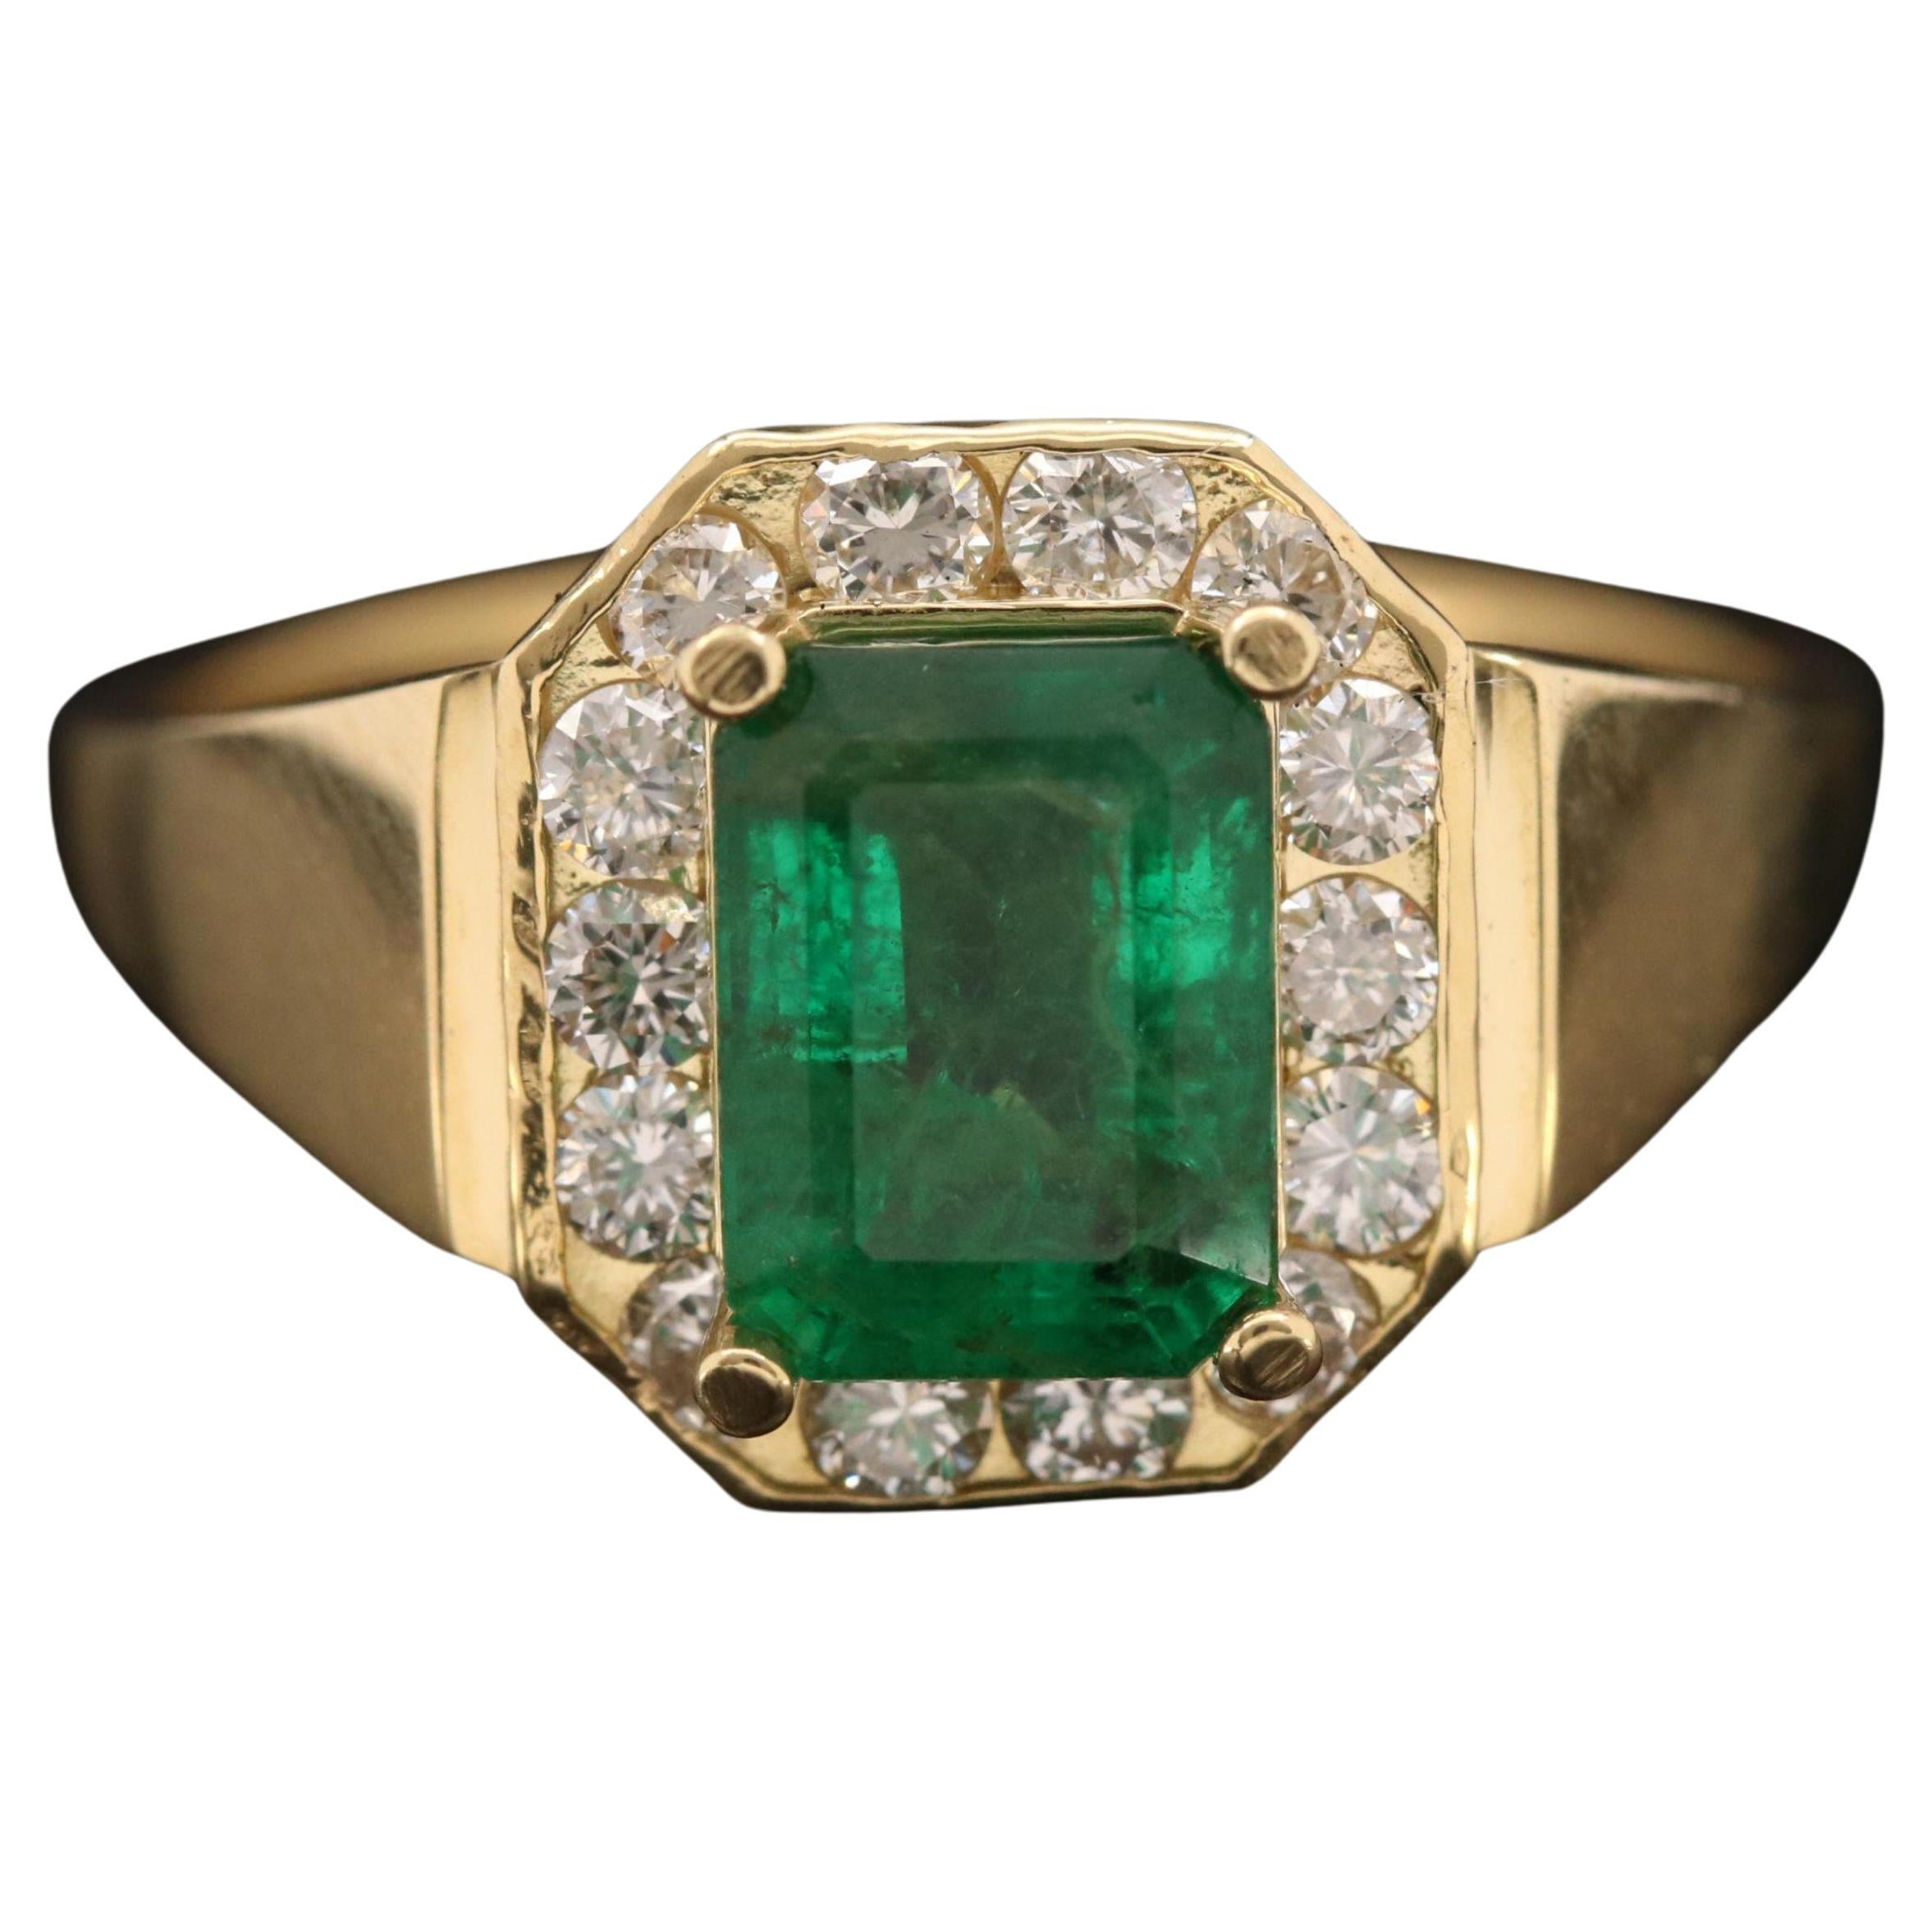 For Sale:  Halo Emerald Diamond Engagement Ring, Emerald Cut Emerald Wedding Ring for Her